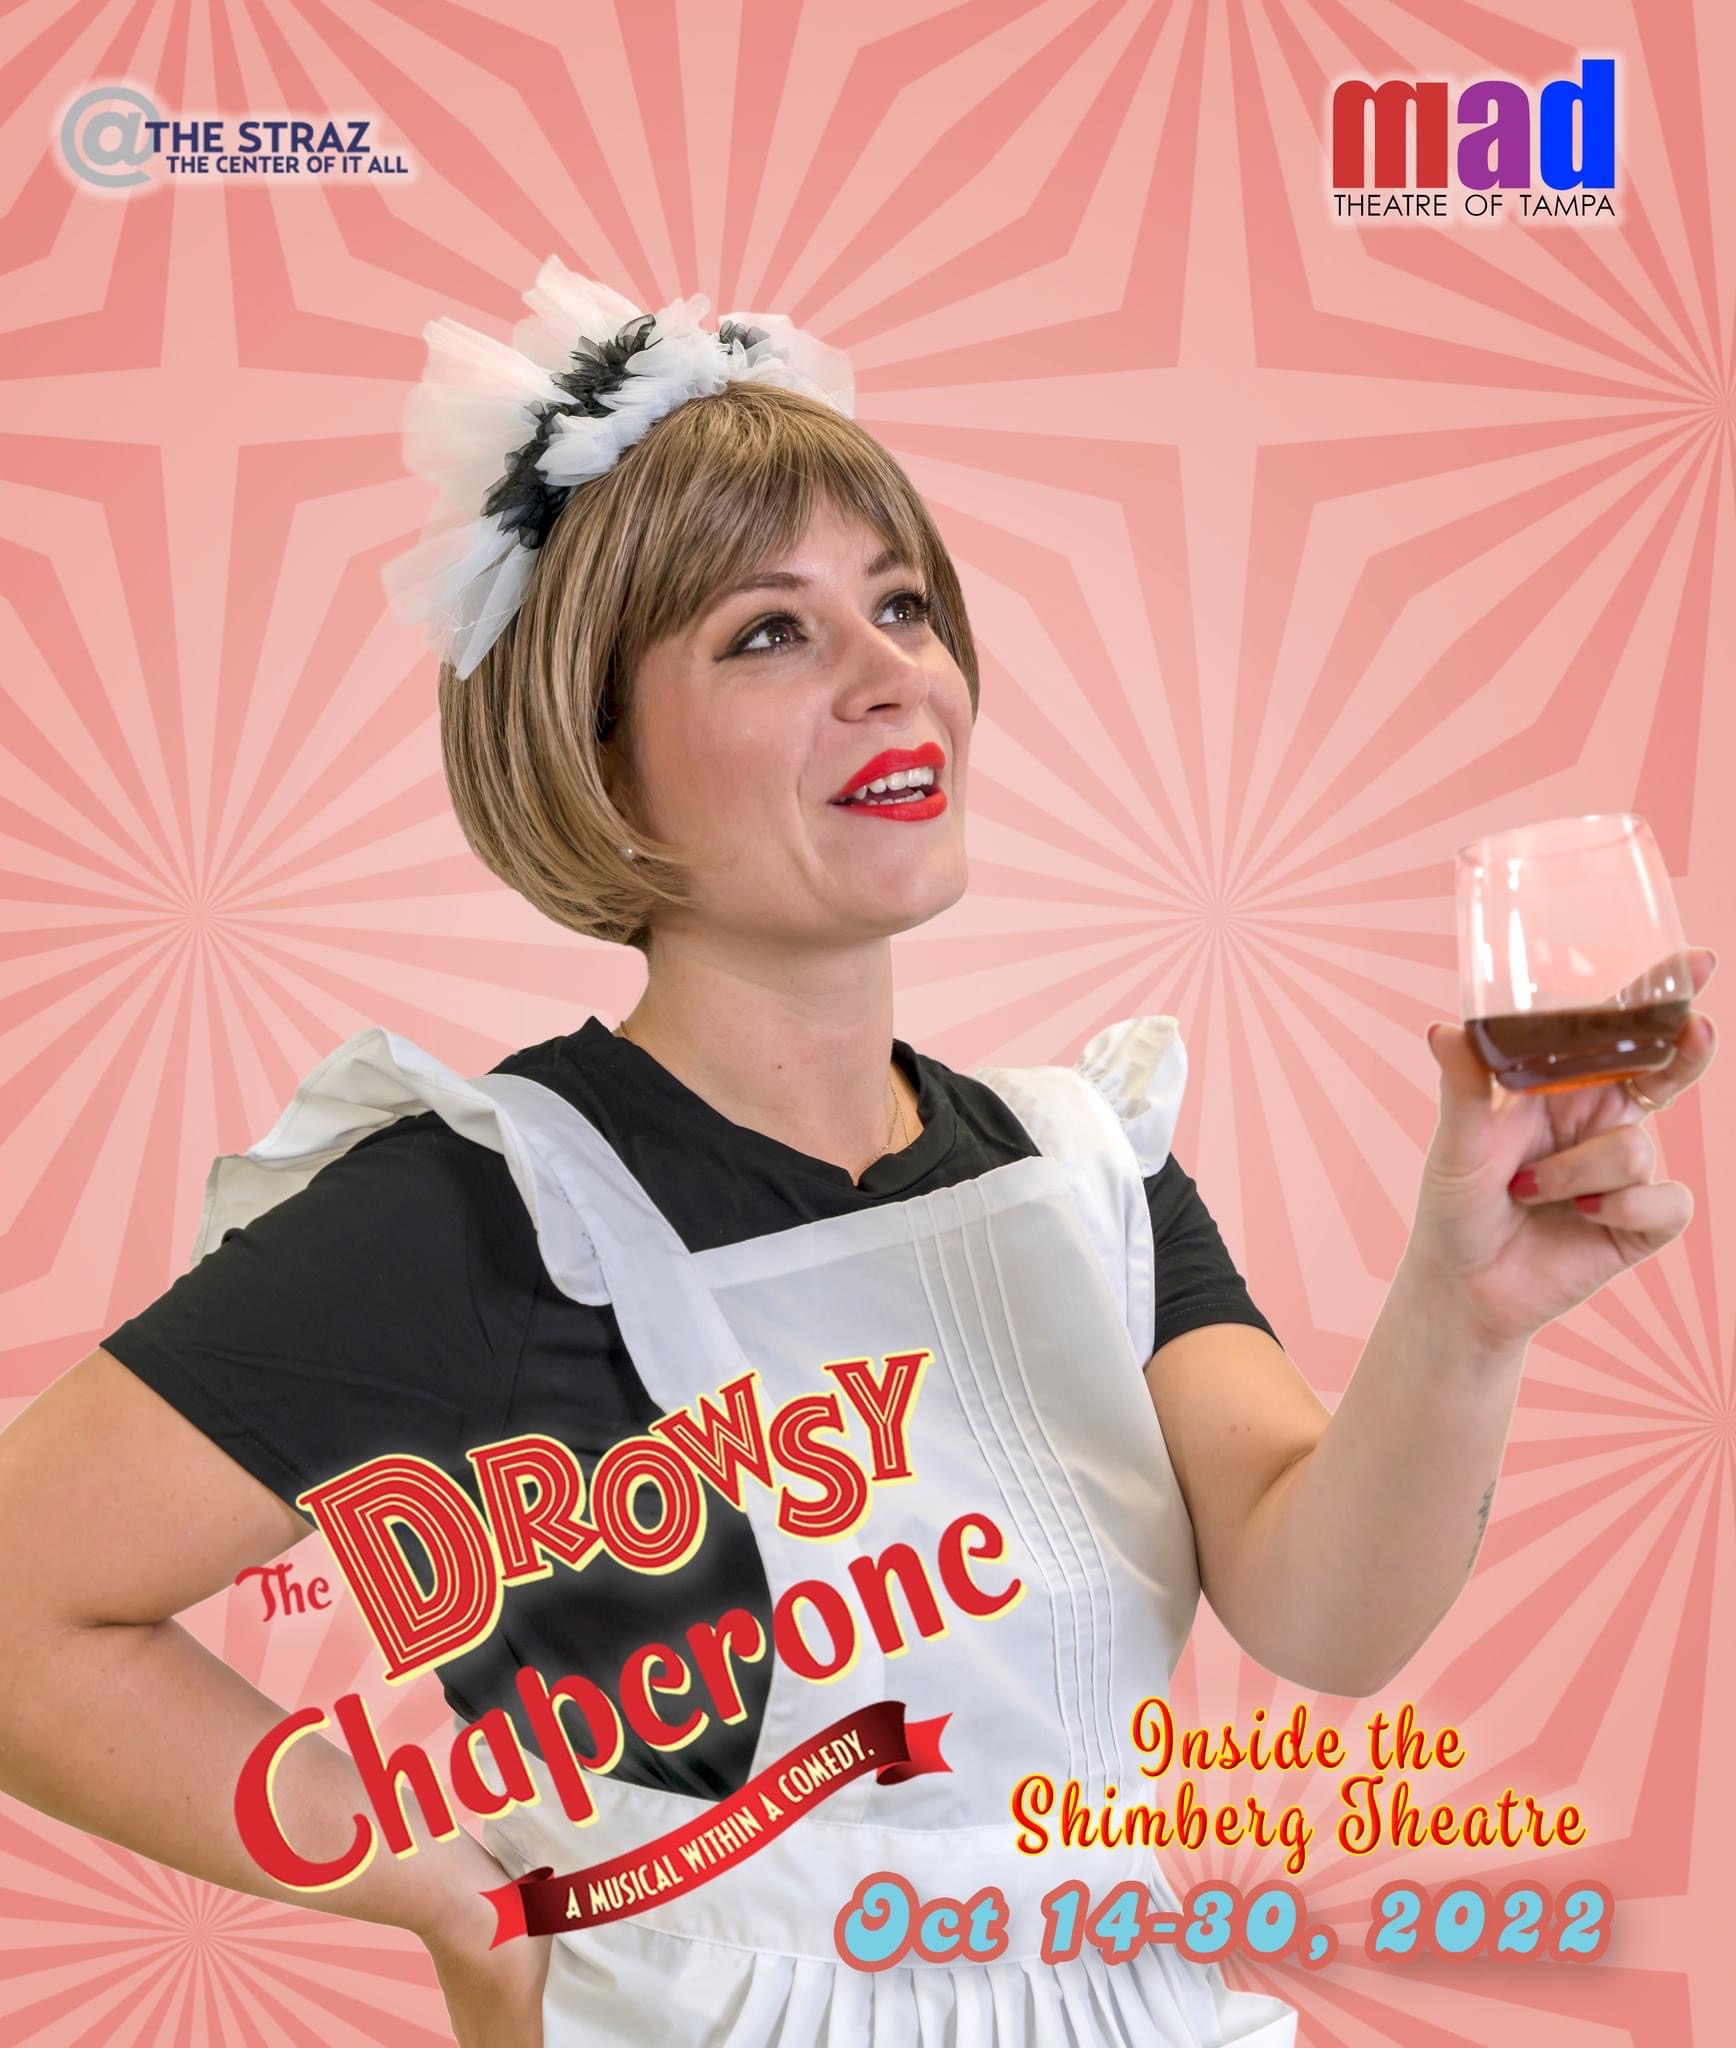 Meet Dottie as played by Jenelle Vinachi in mad Theatre of Tampa’s THE DROWSY CHAPERONE.